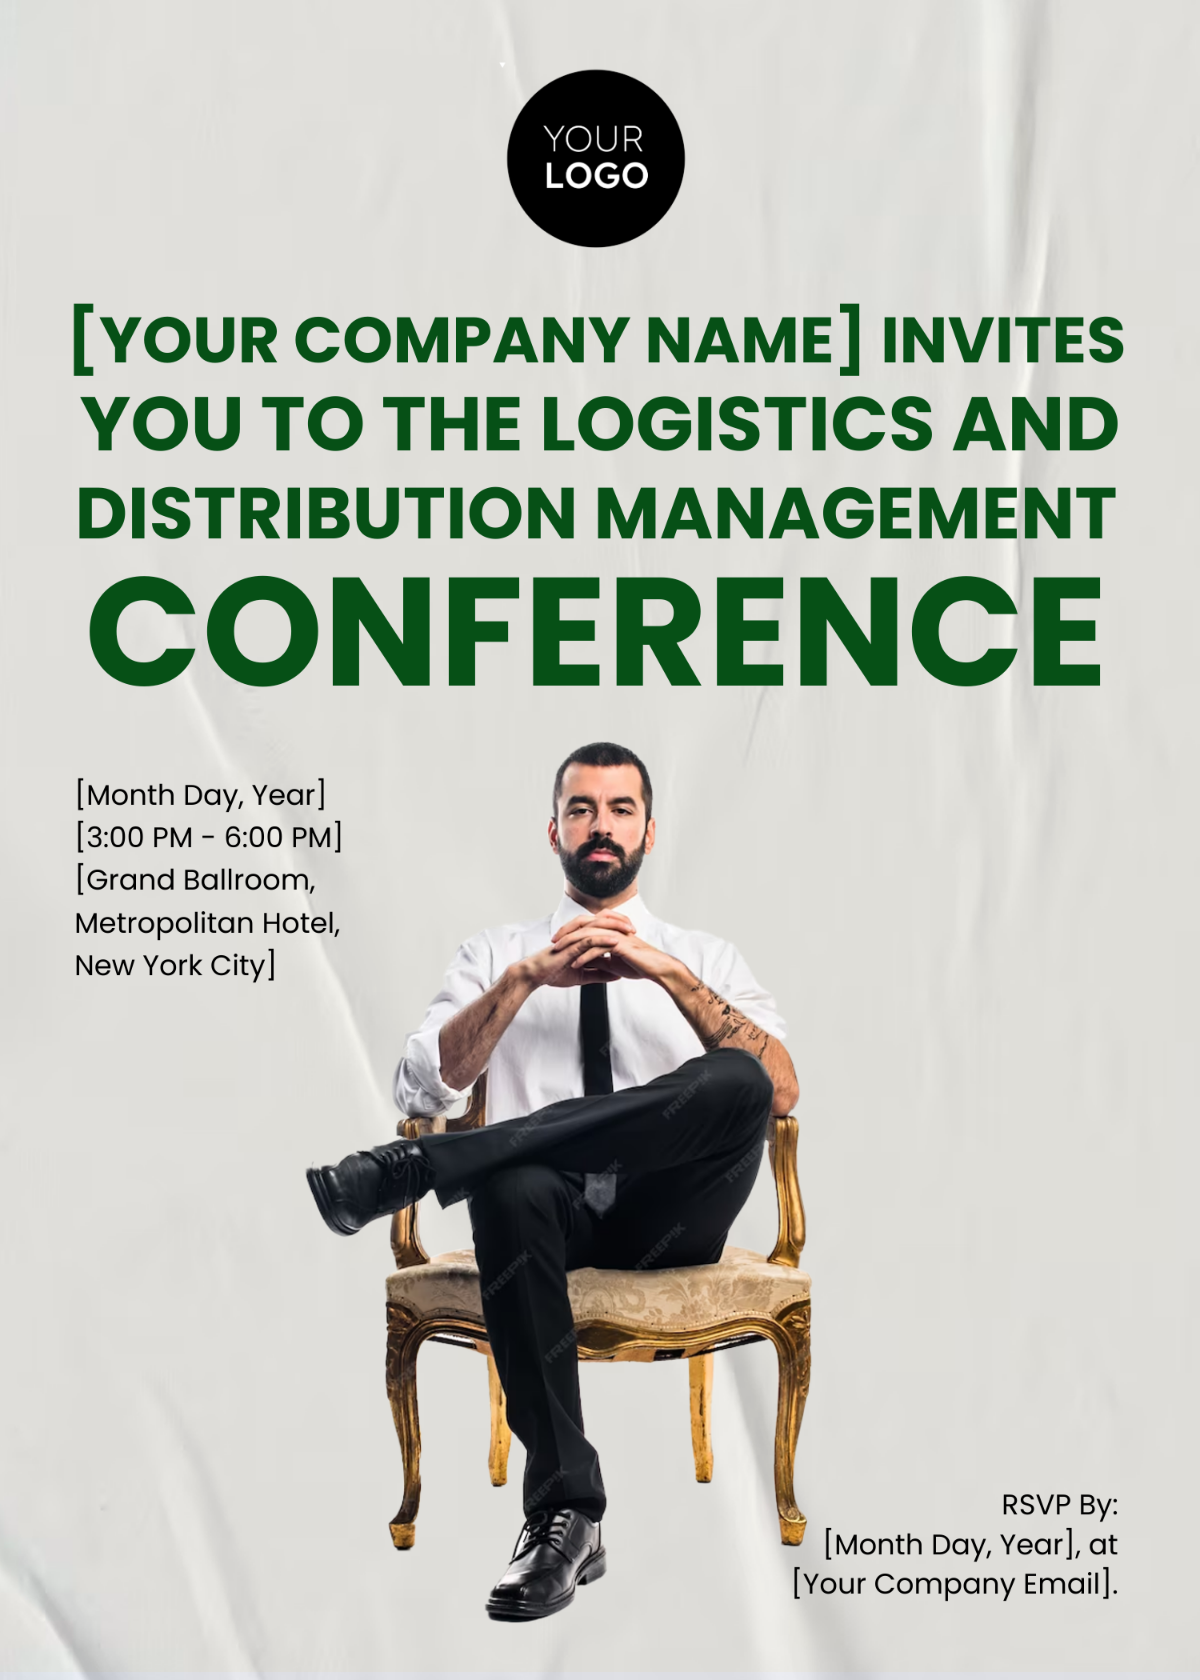 Logistics and Distribution Management Conference Invitation Card